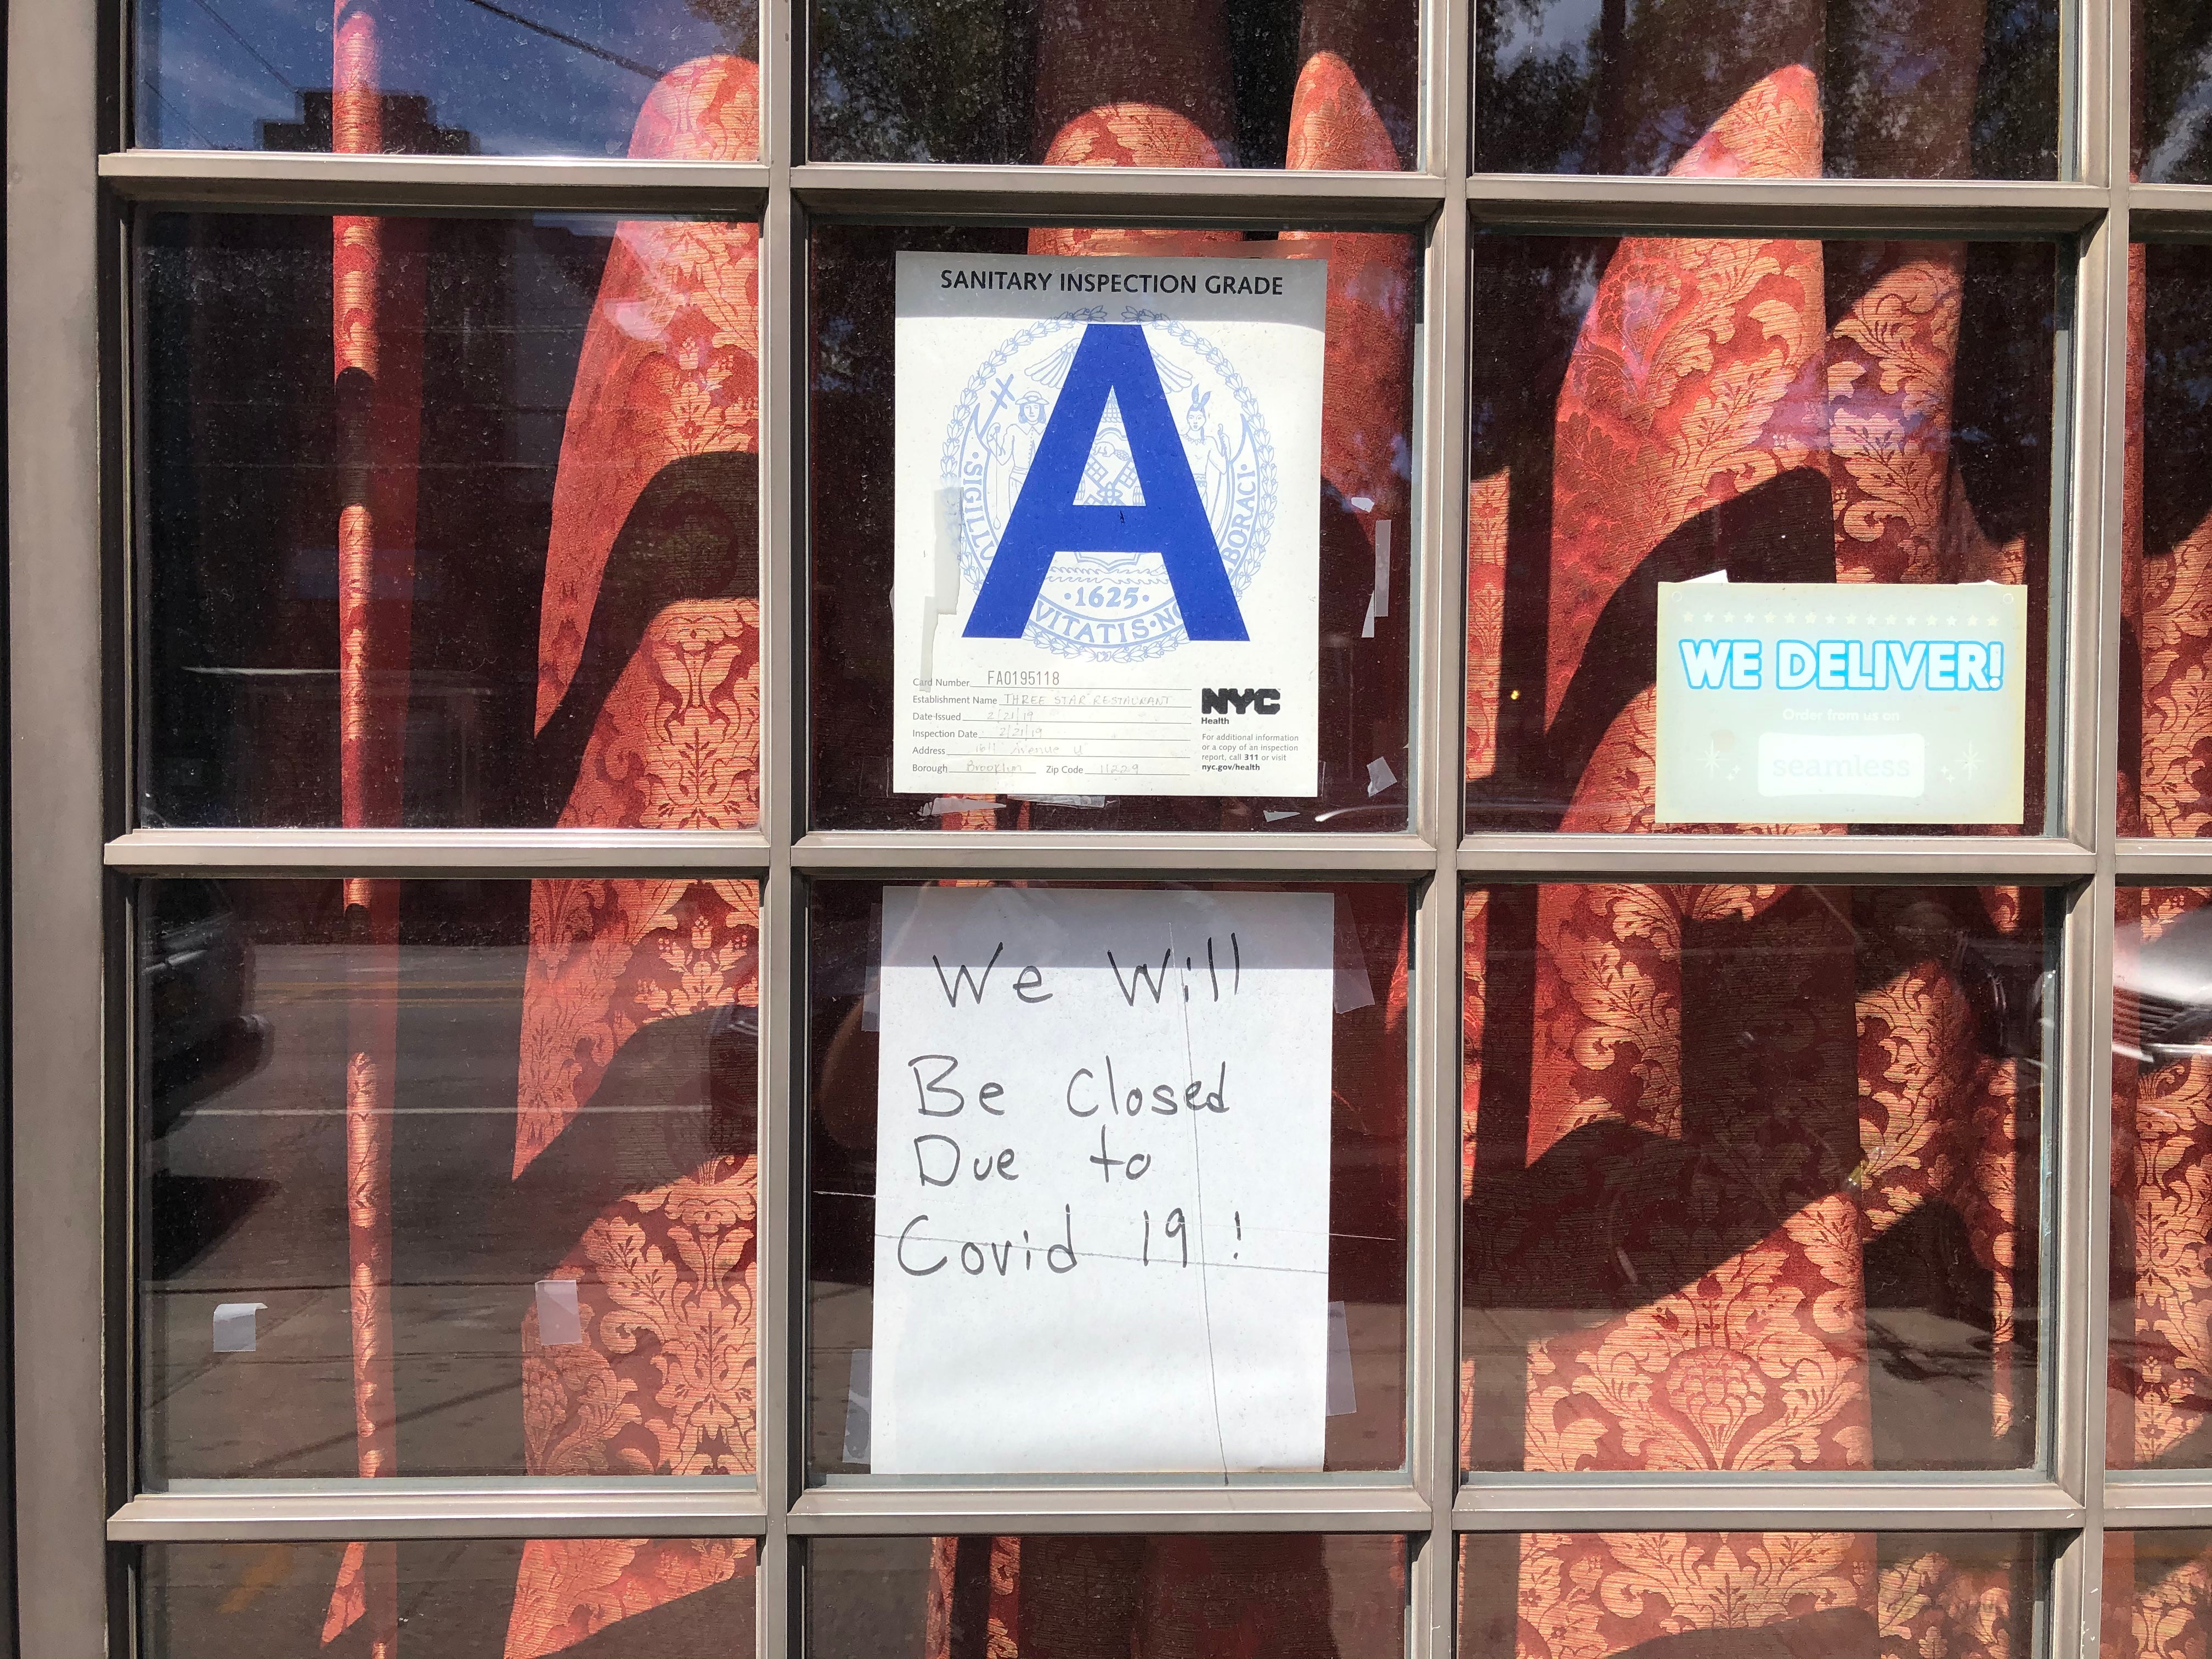 We will be closed due to covid19 sign